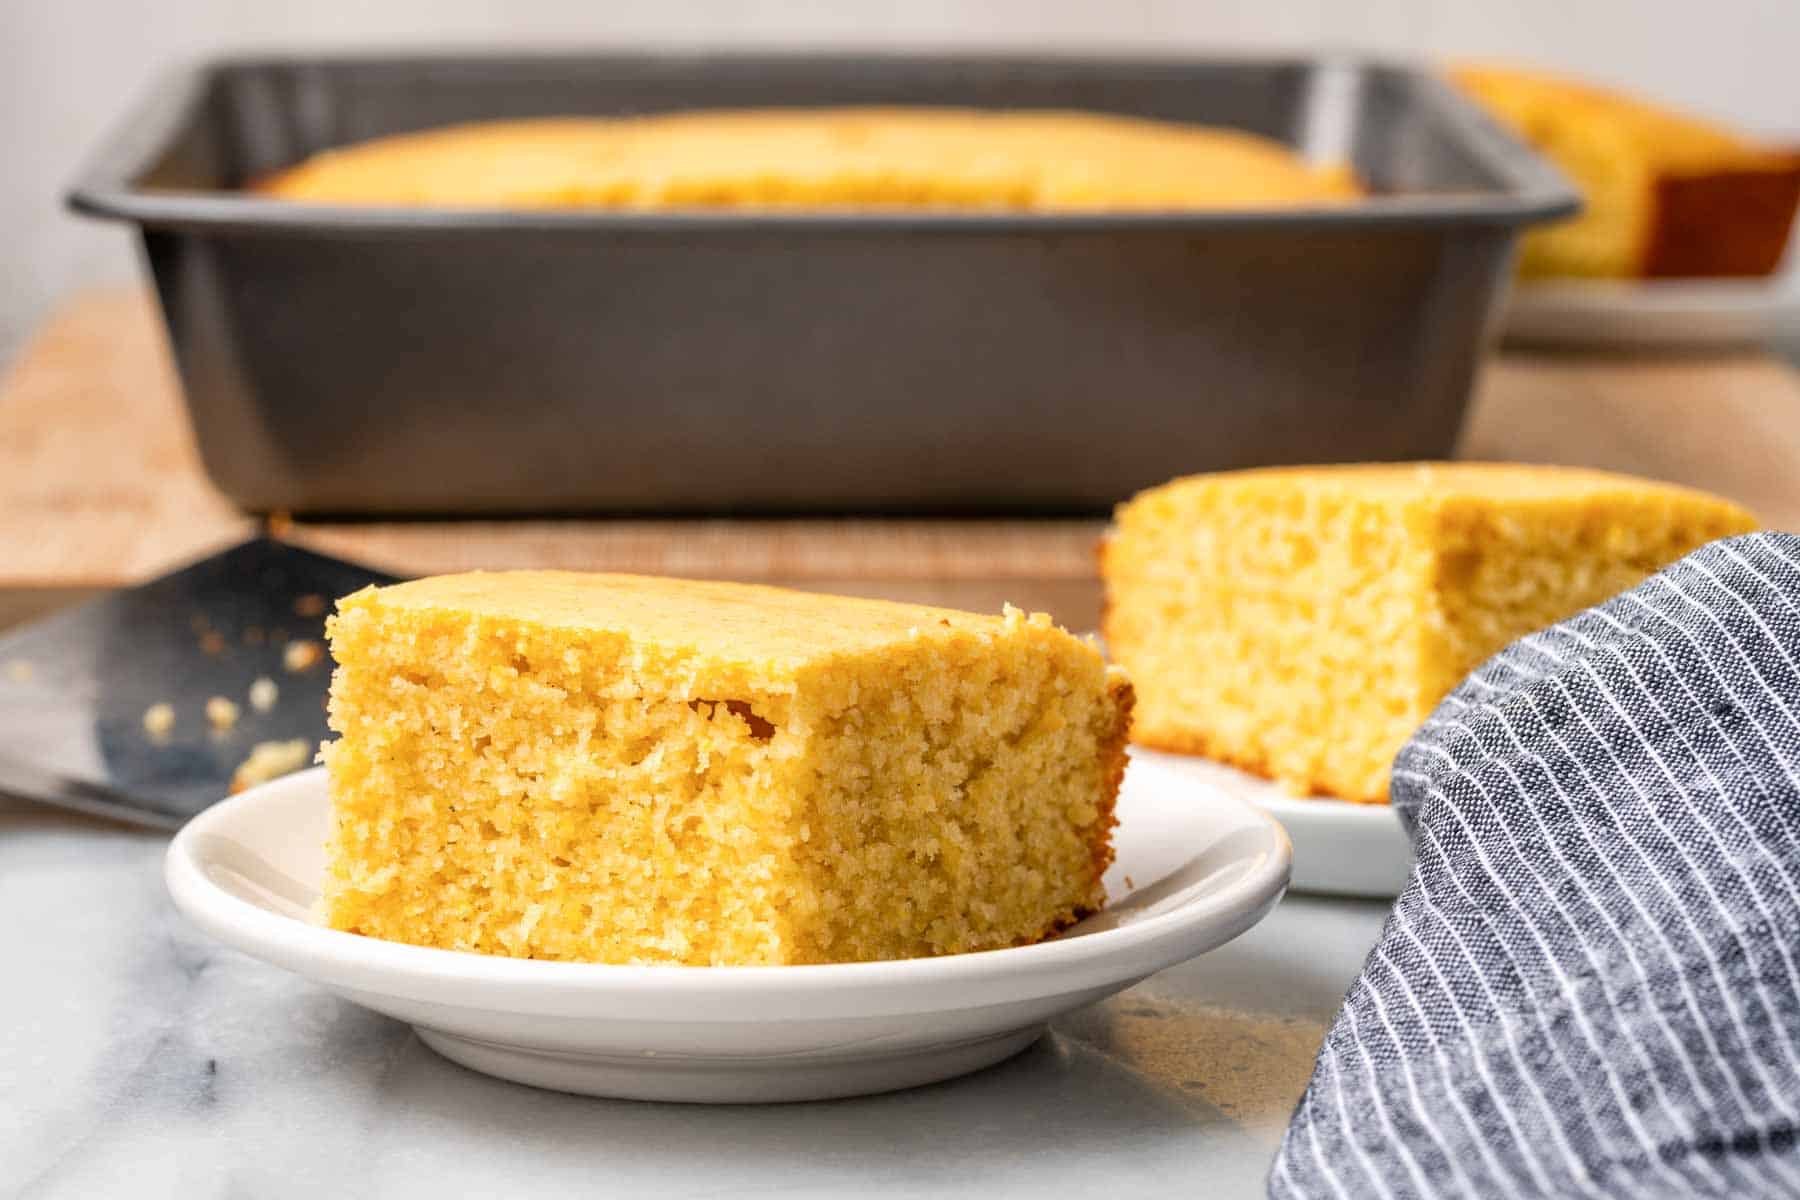 sweet cornbread slices on white plates with baking dish in background.